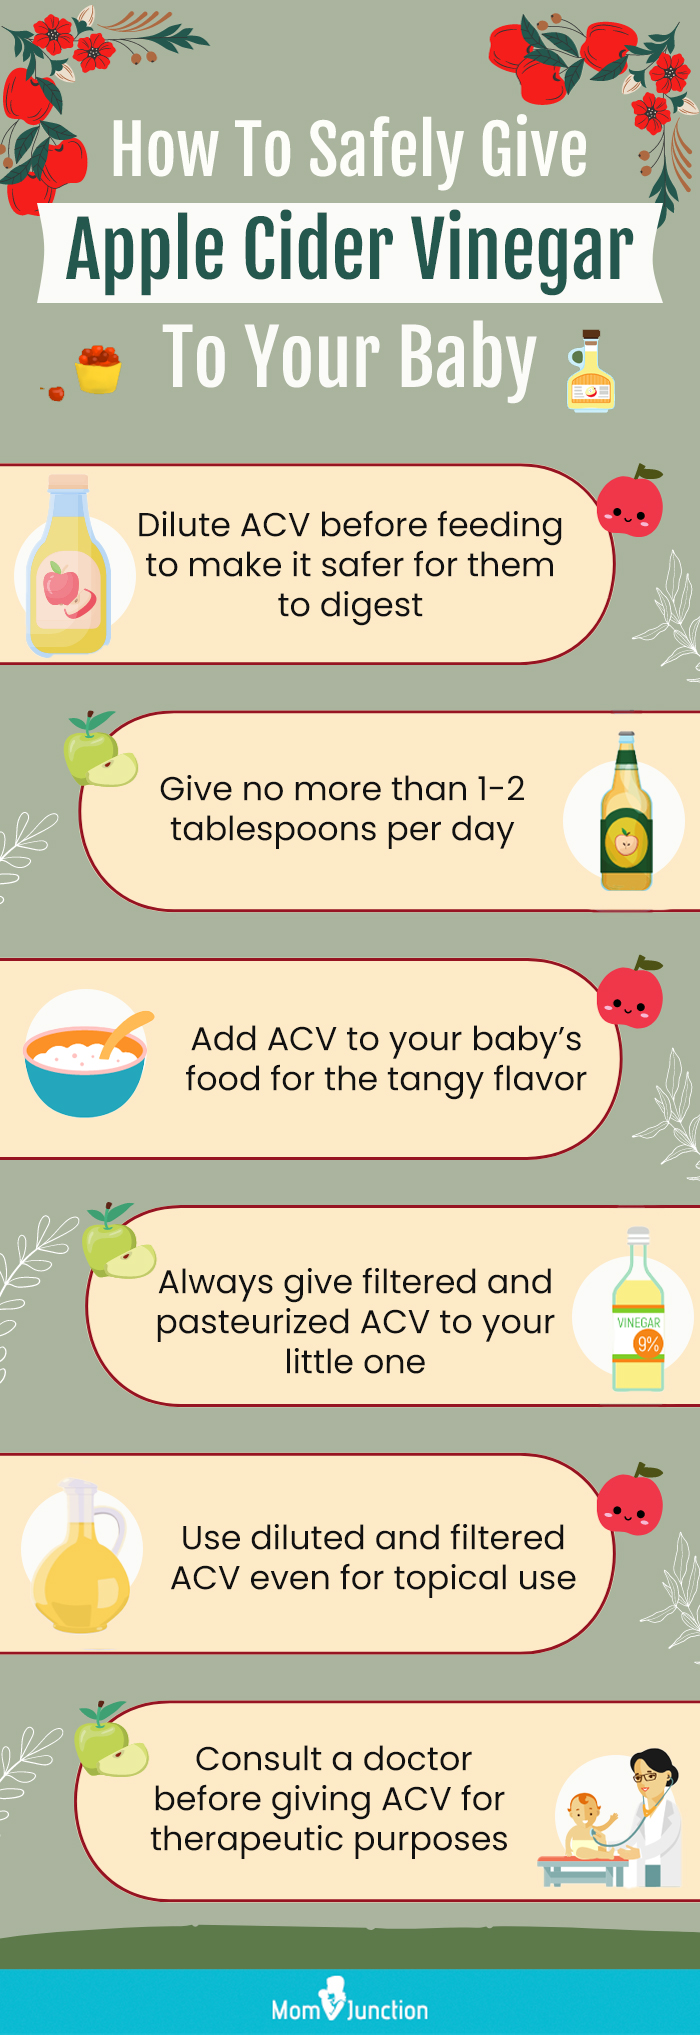 how to safely give apple cider vinegar to your baby [infographic]